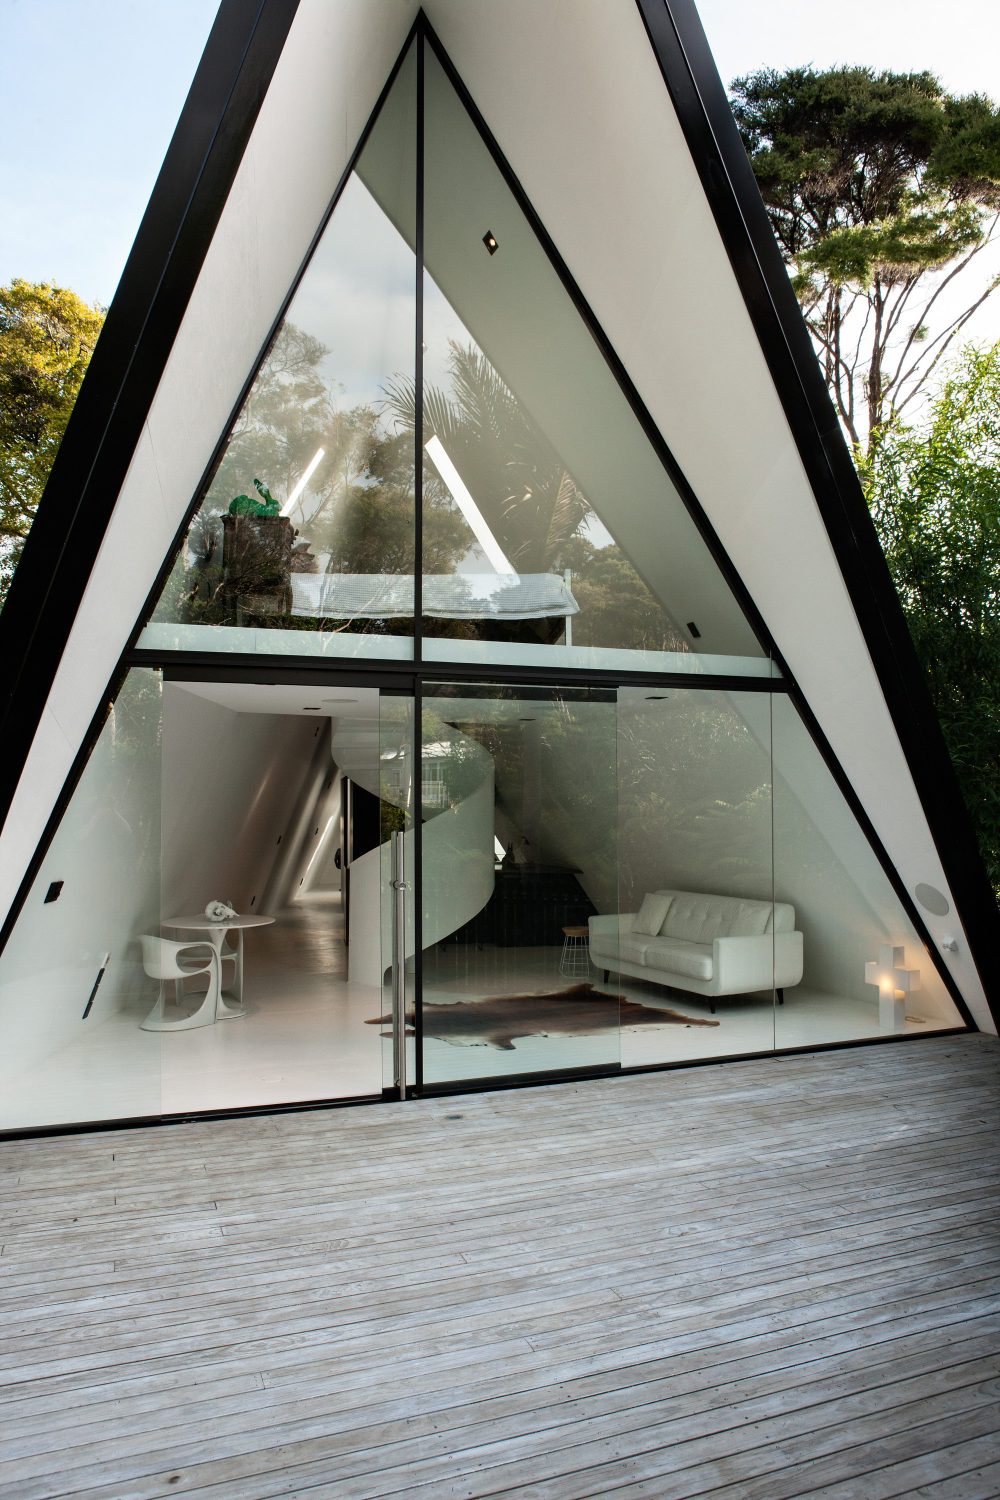 Tent House | A-Frame Cabin by Chris Tate